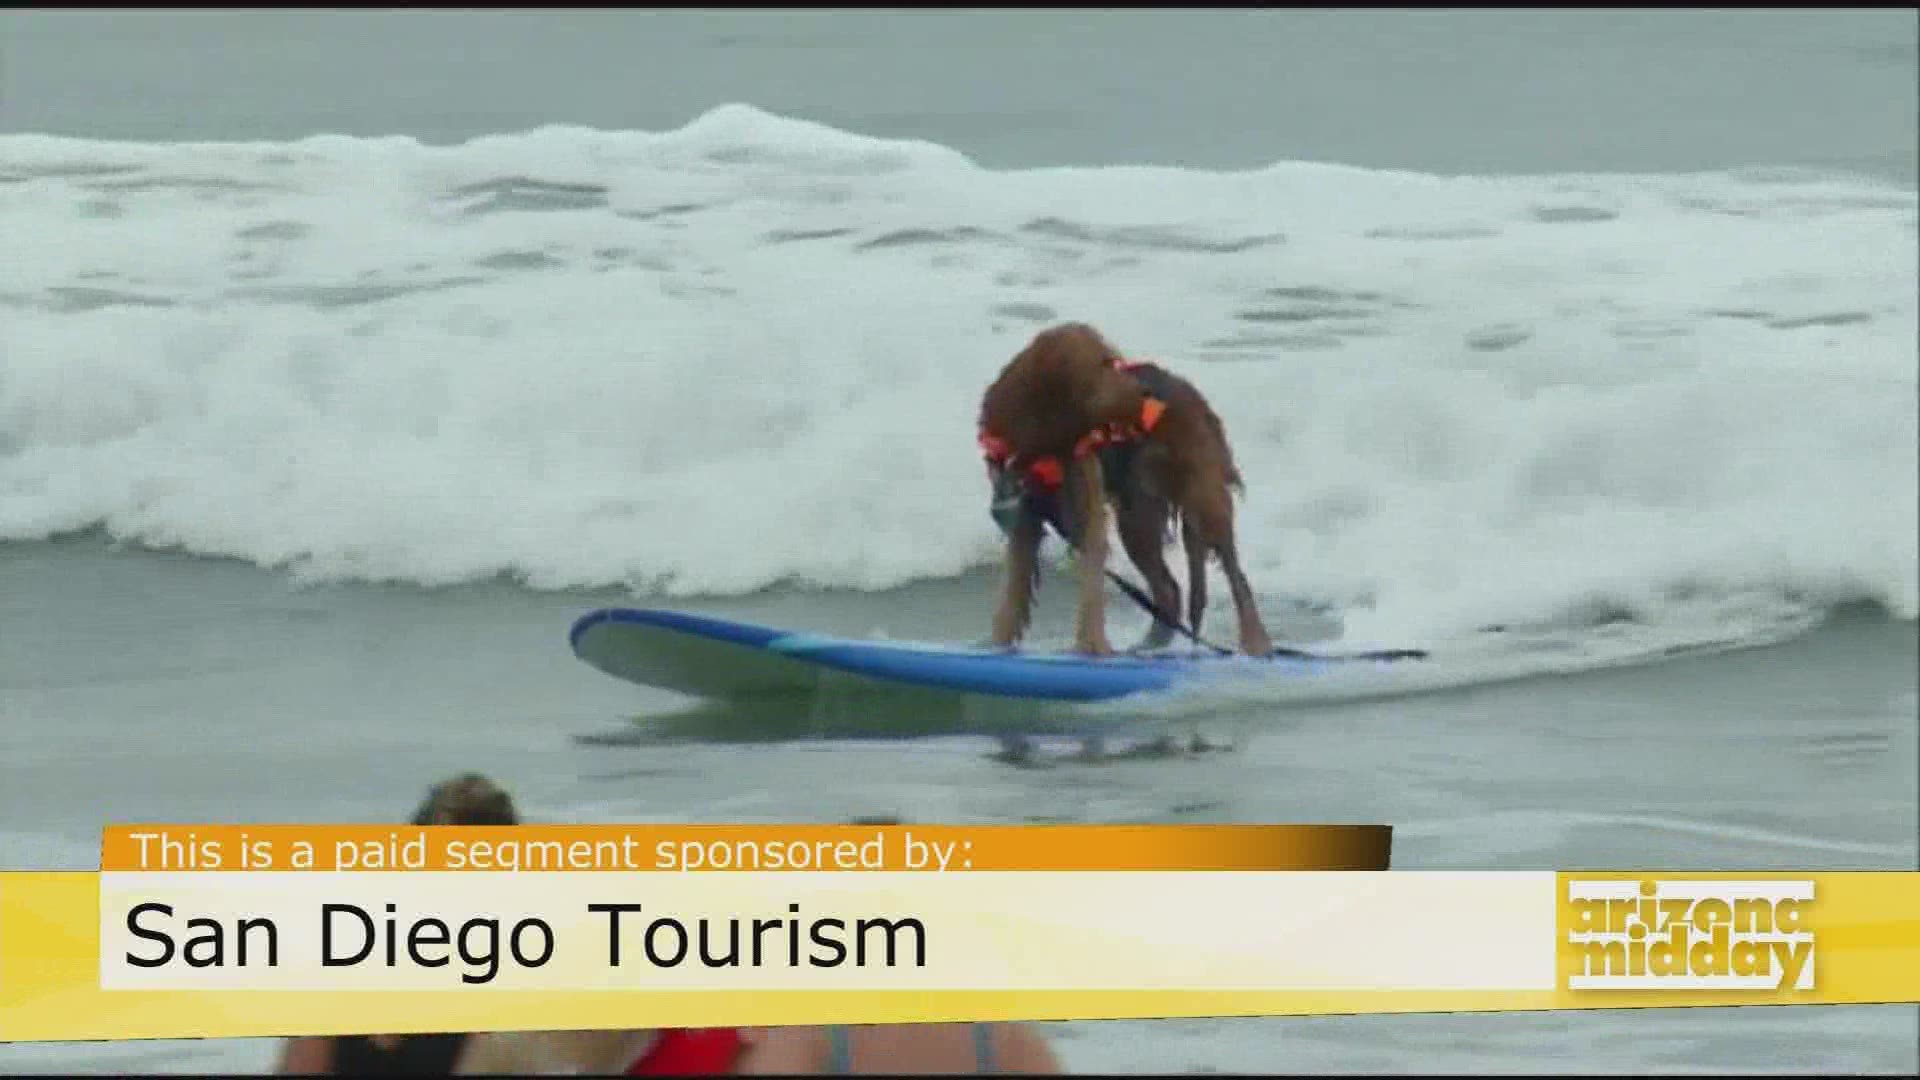 We show you the fun the whole family can have in San Diego at the dog-friendly beaches and more!